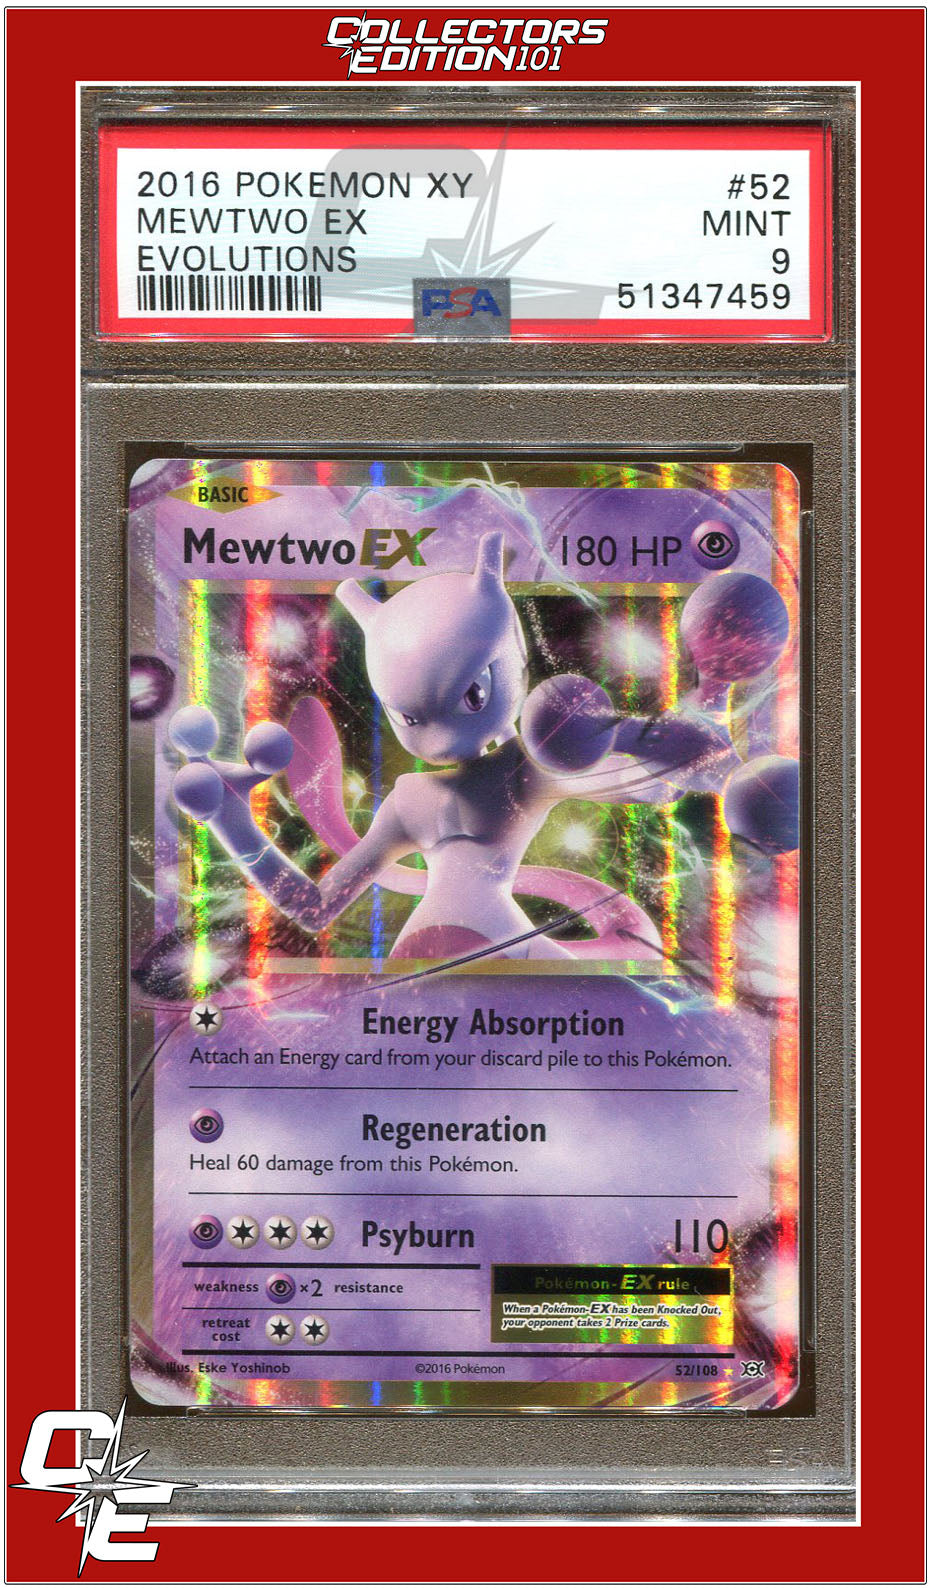 trying to get my mewtwo collection in all PSA : r/pokemoncardselling